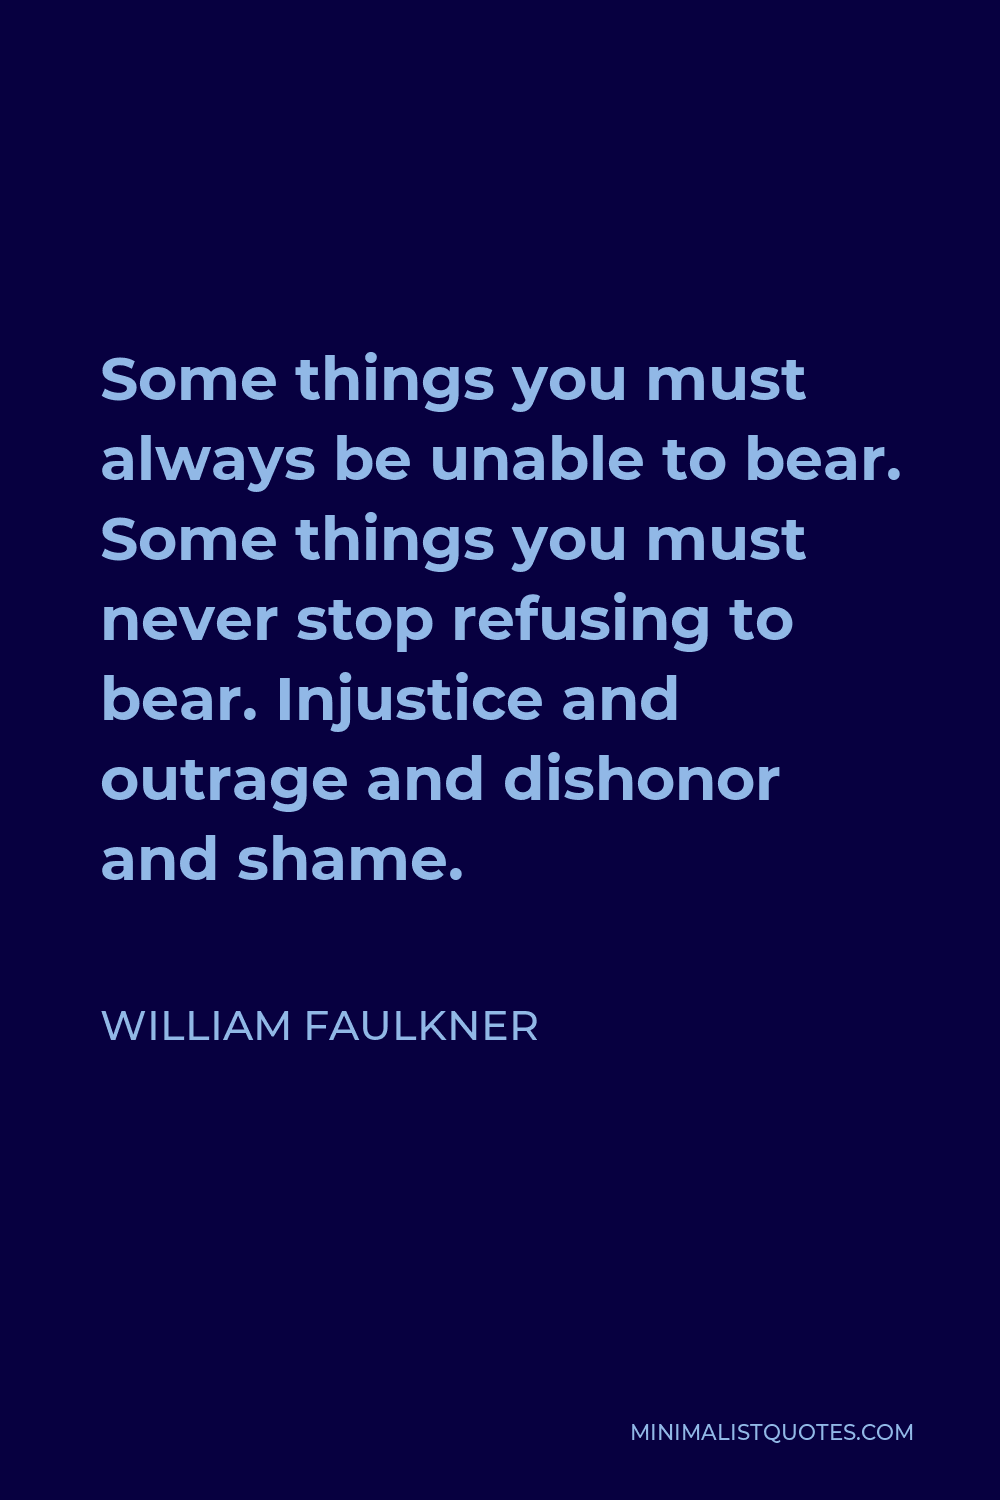 William Faulkner Quote - Some things you must always be unable to bear. Some things you must never stop refusing to bear. Injustice and outrage and dishonor and shame.